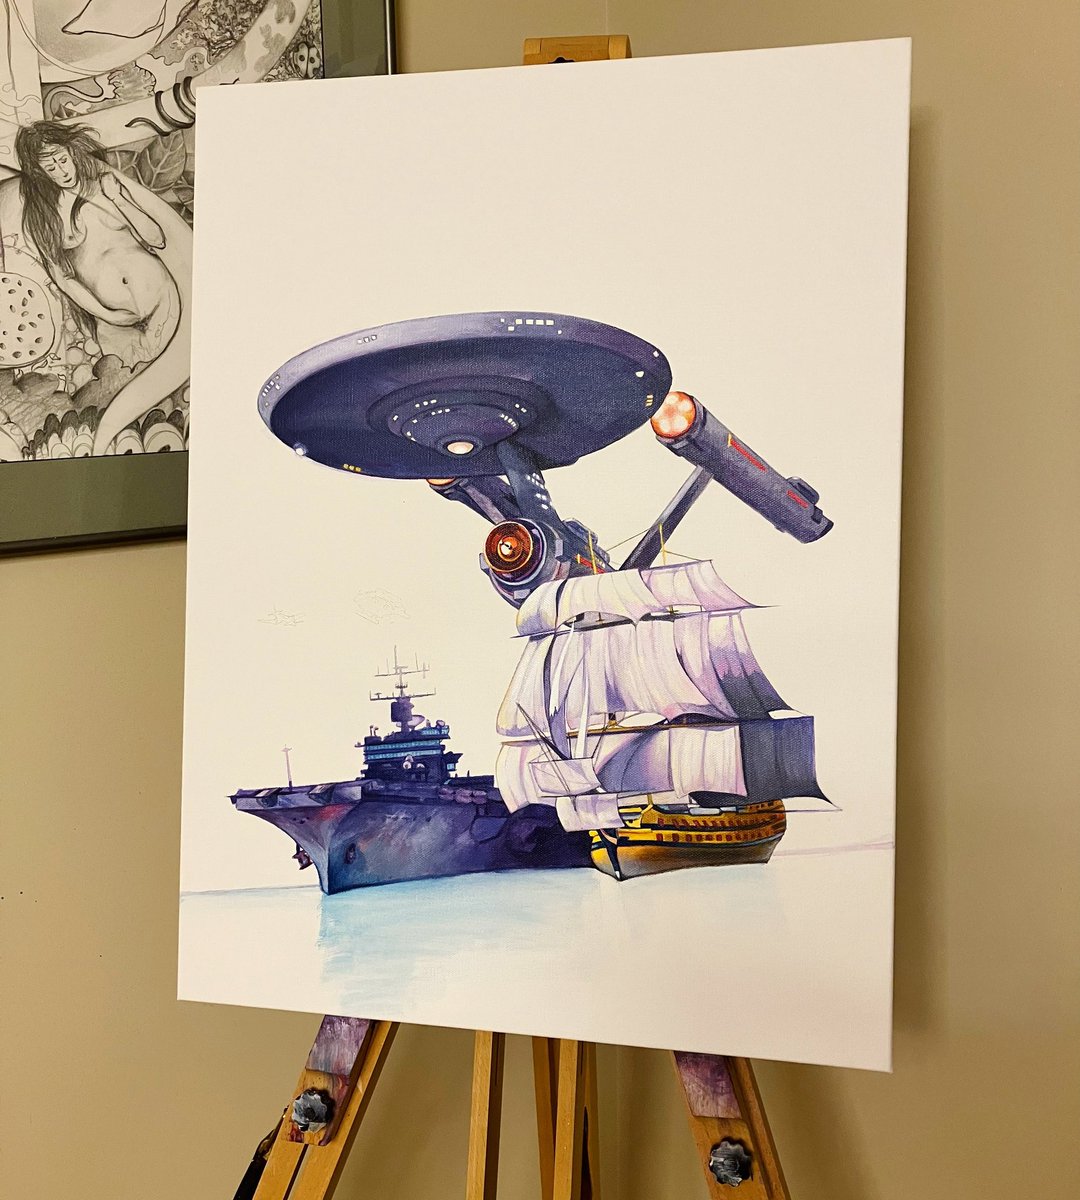 And the USS Enterprise is now in.  Love how my painting for this book cover art is progressing and looking forward to continuing it tomorrow! ❤️🖖

retrospectstudios.ca/special-editio…

#StarTrek #art #fanart #scifiart #bookcover #Canadian @thomasthecat